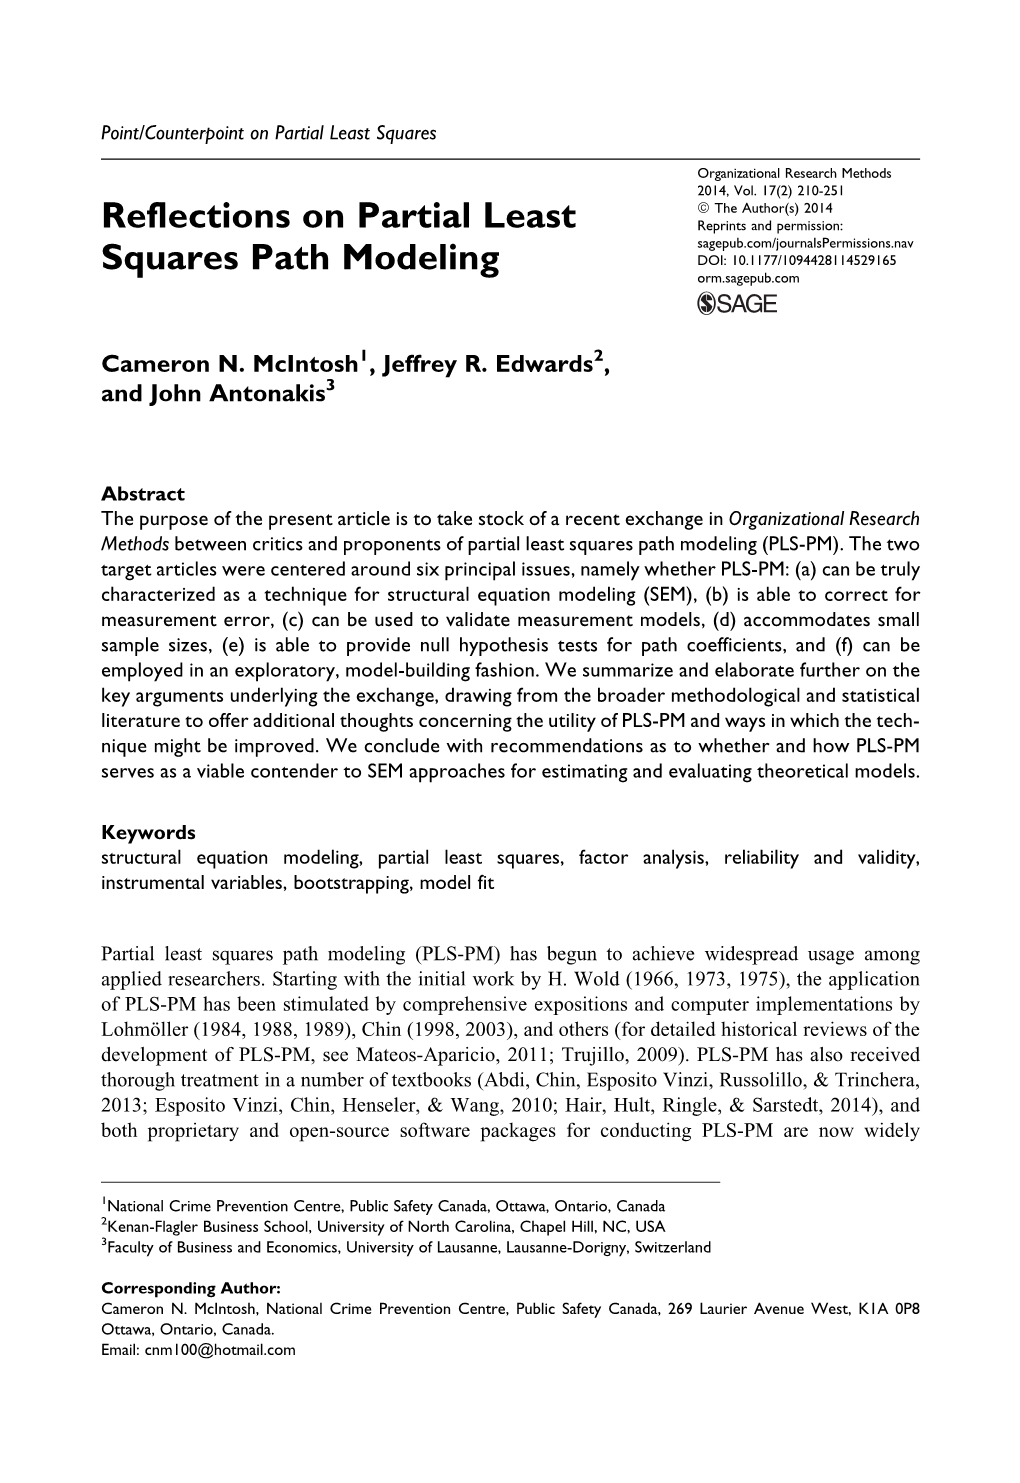 Reflections on Partial Least Squares Path Modeling